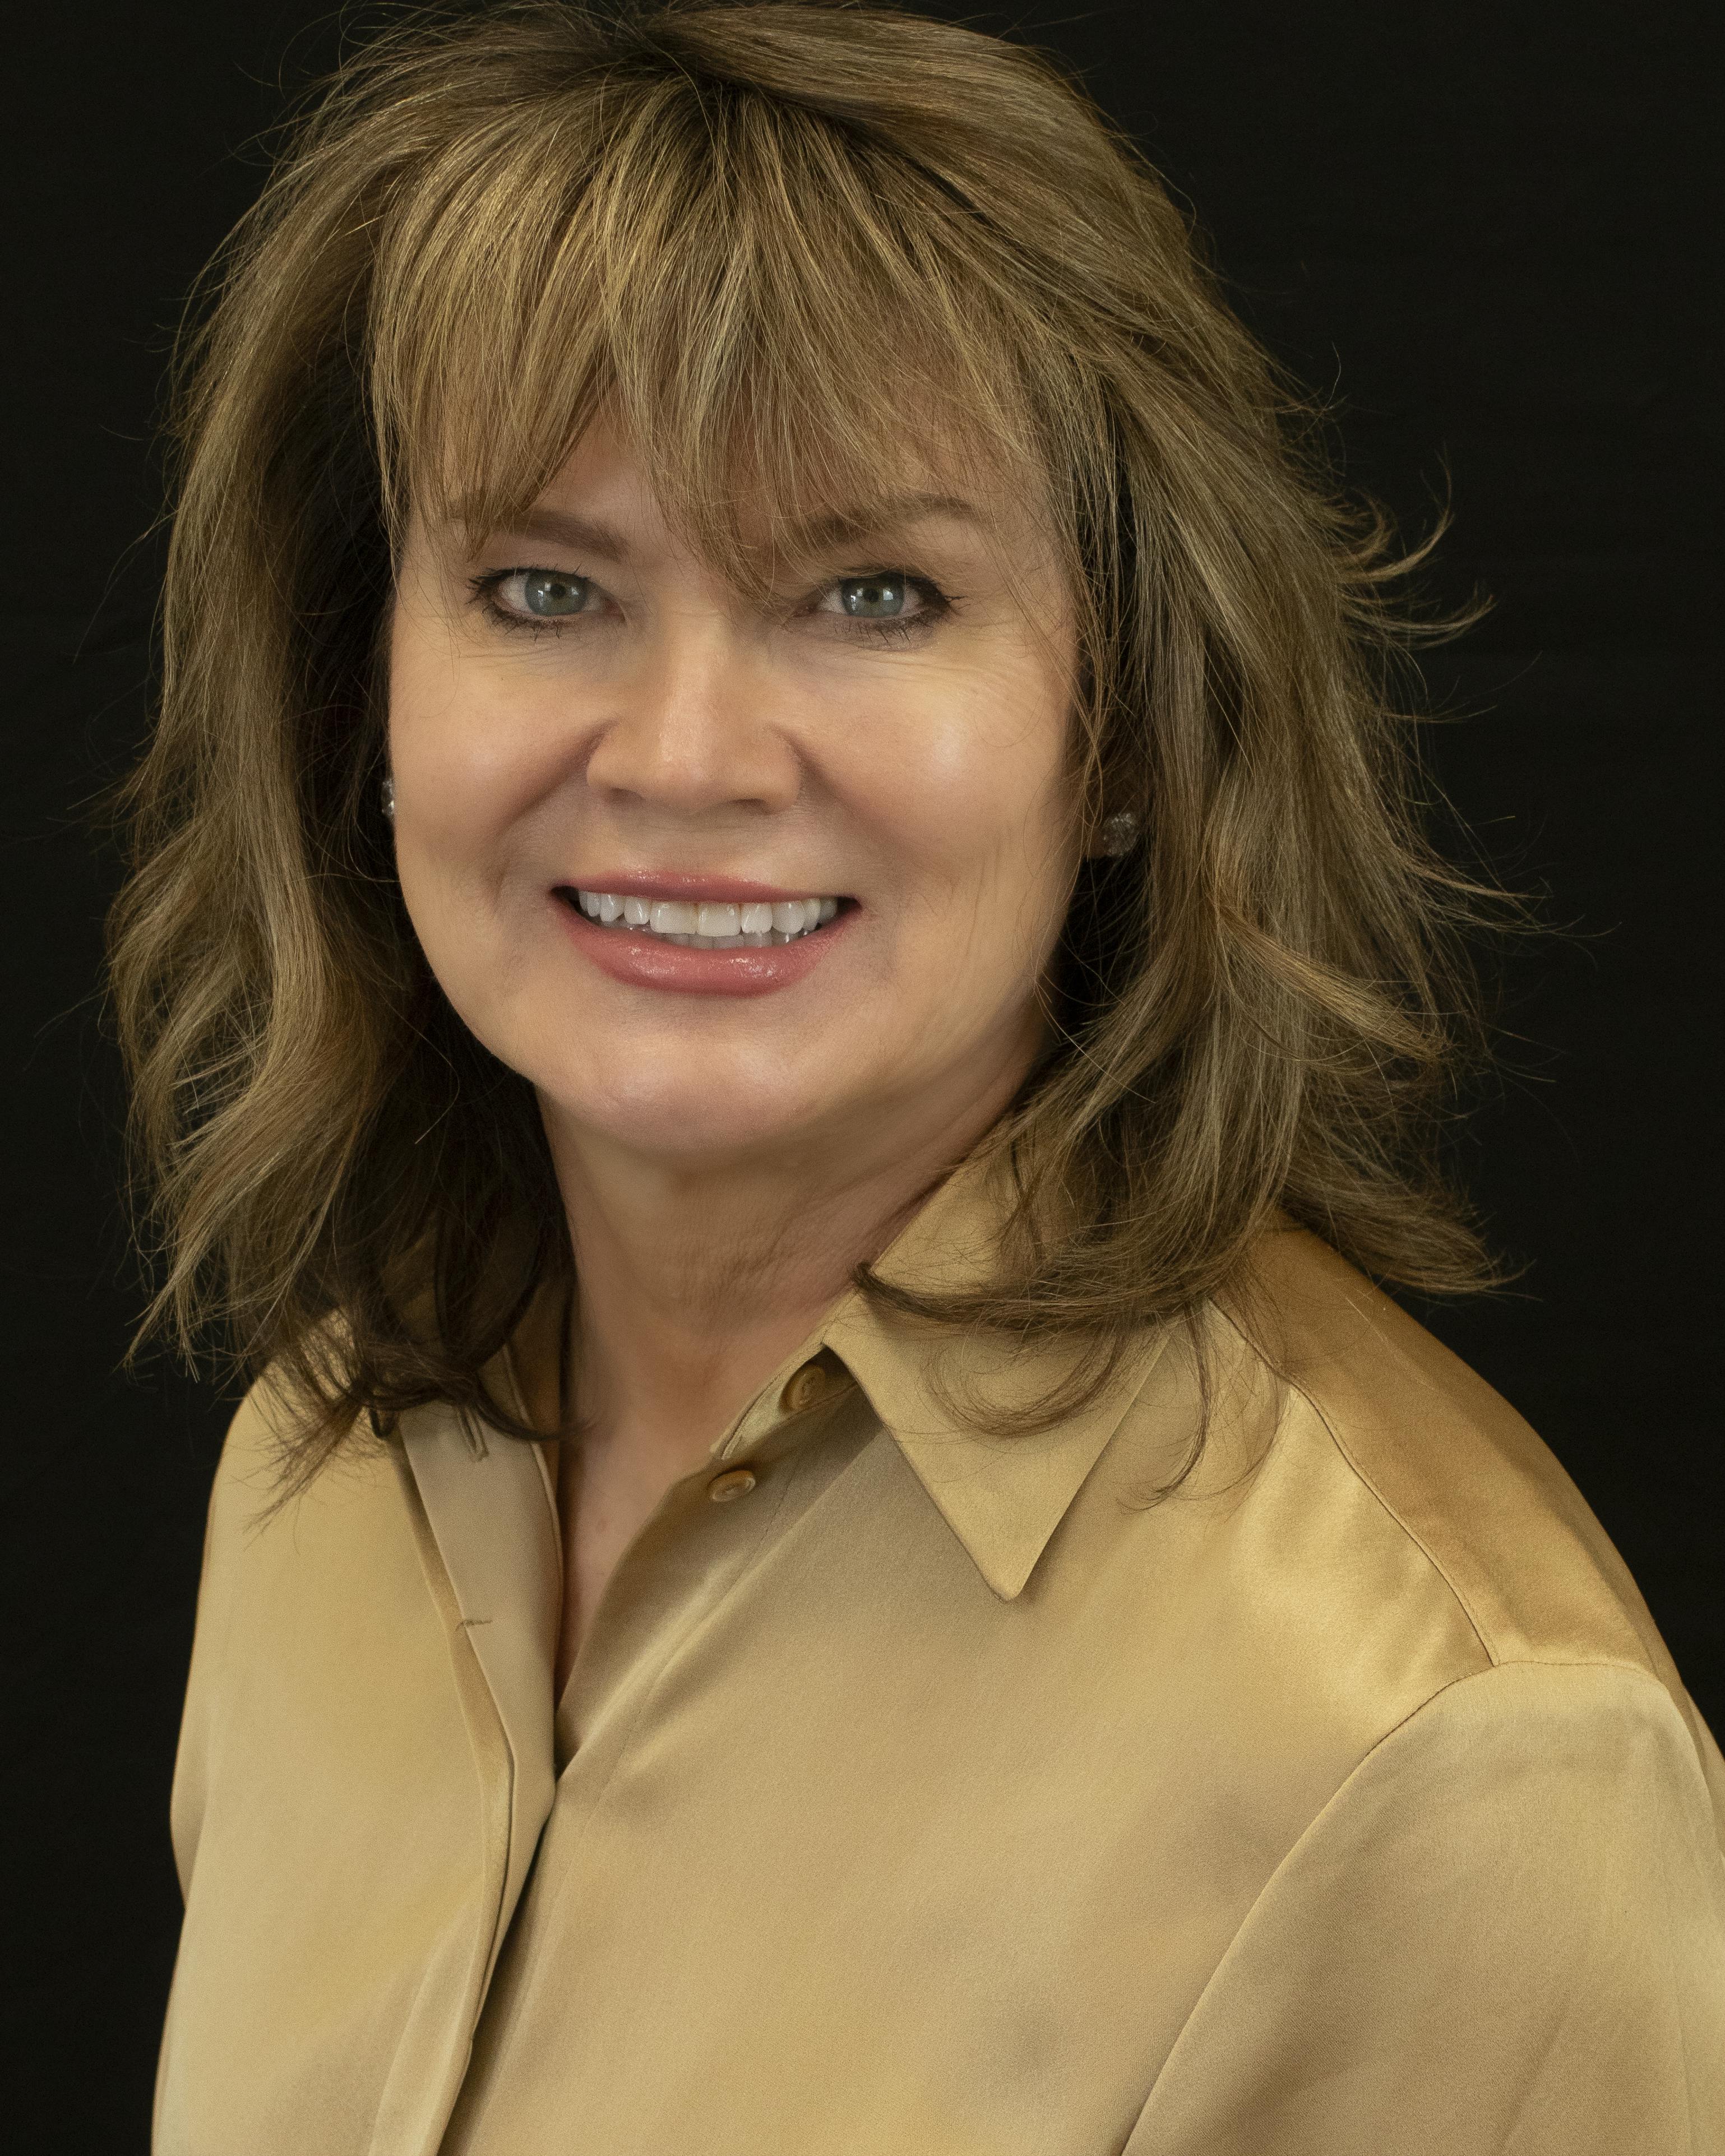 Cindy Greenfield, PT, wearing a tan jacket over a white shirt in front of a blue background